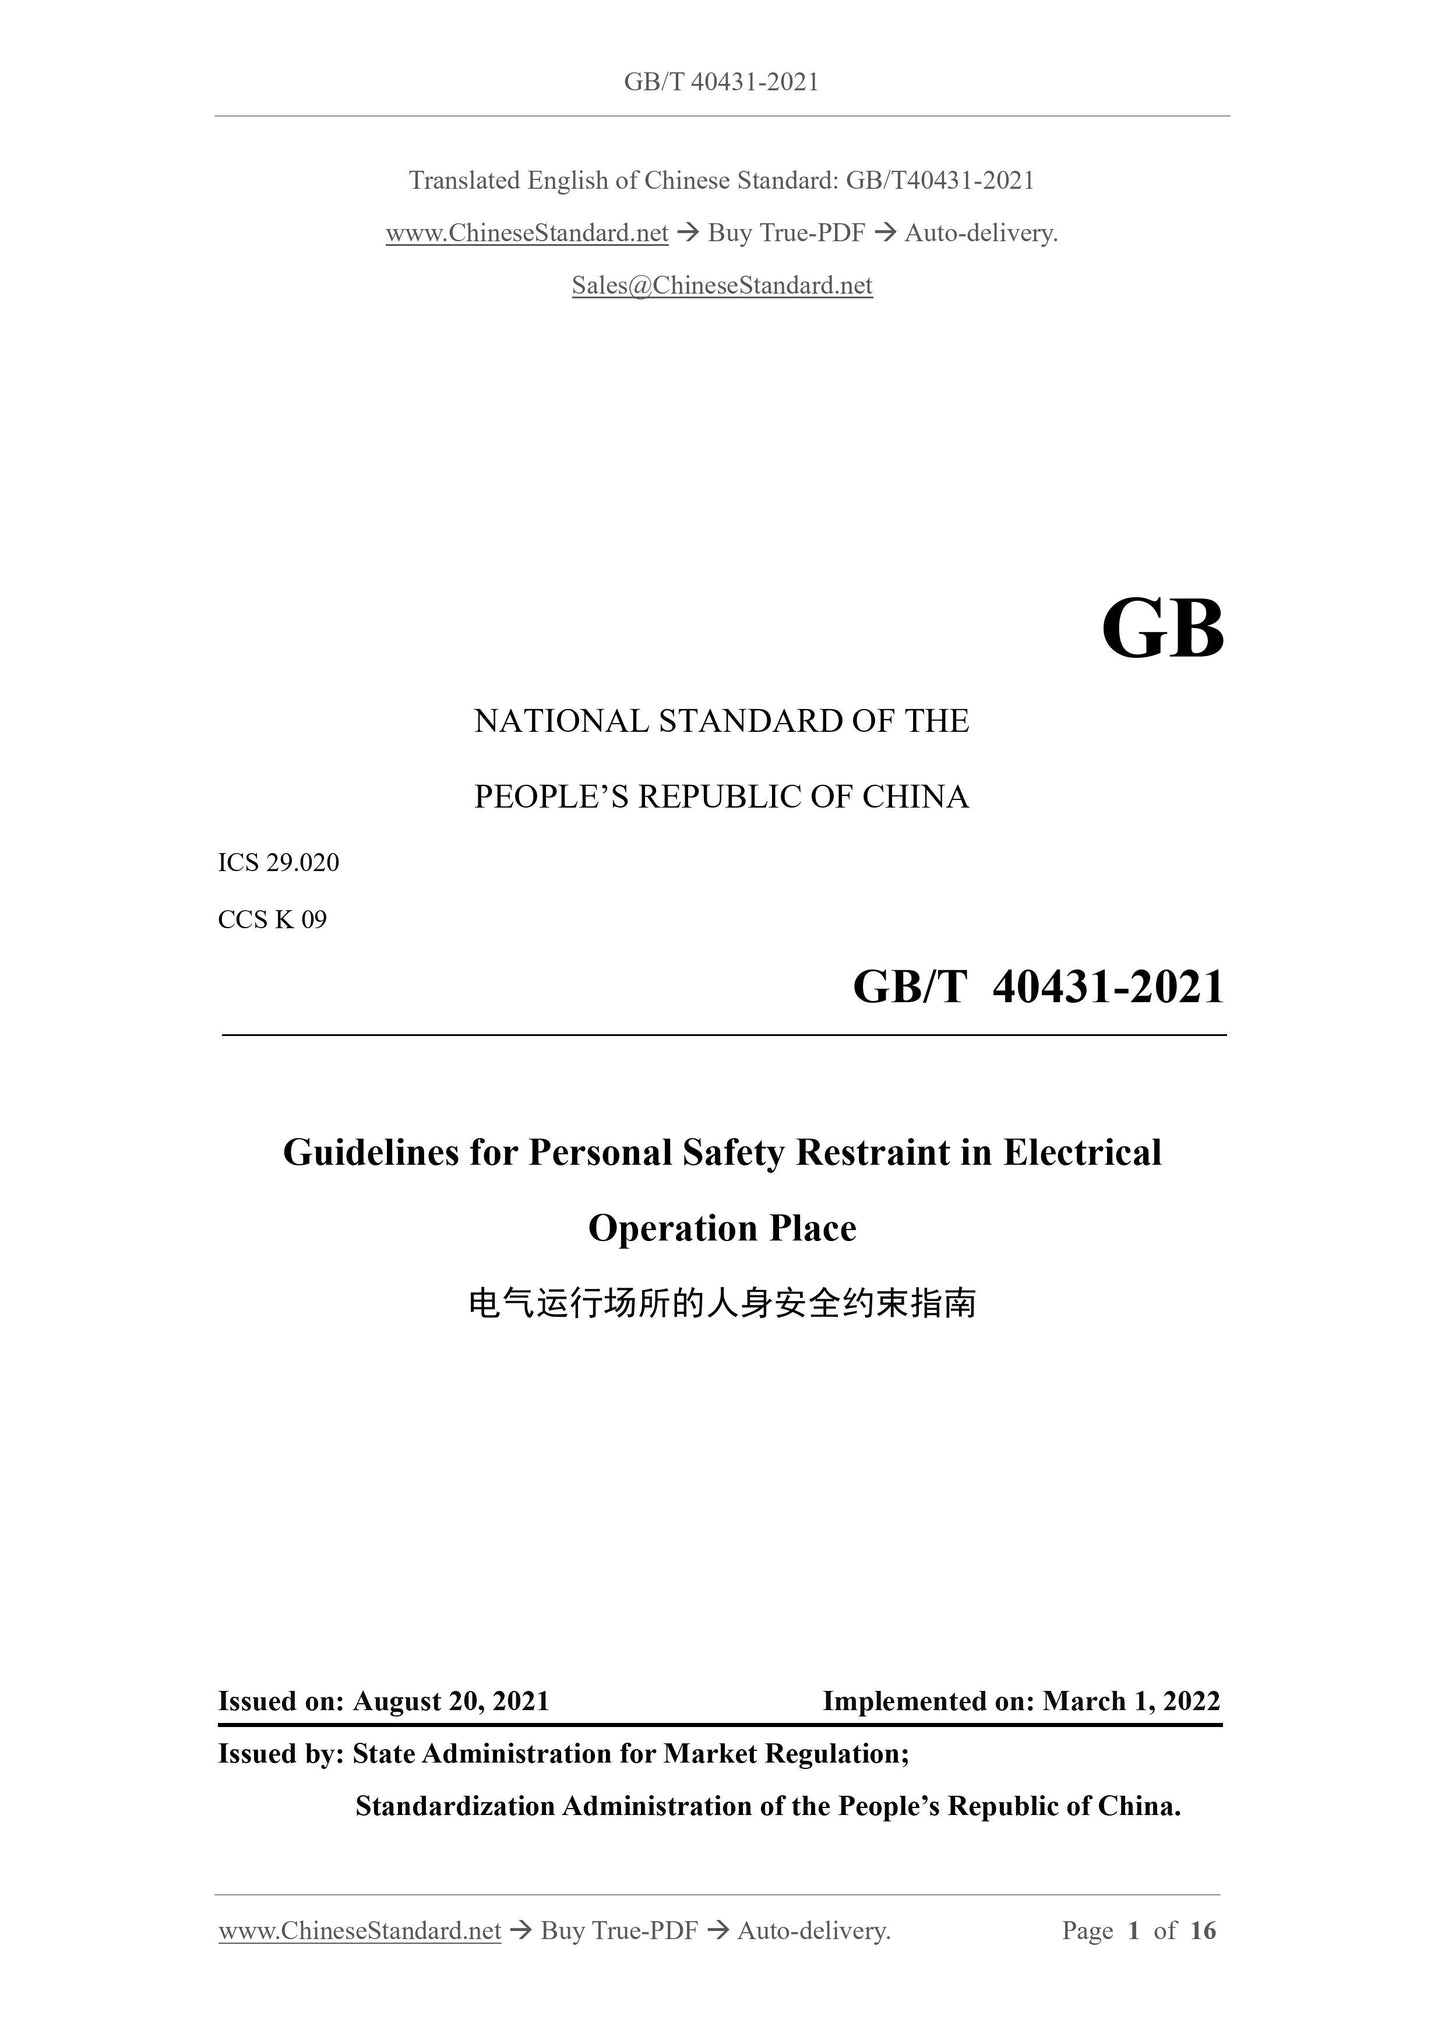 GB/T 40431-2021 Page 1